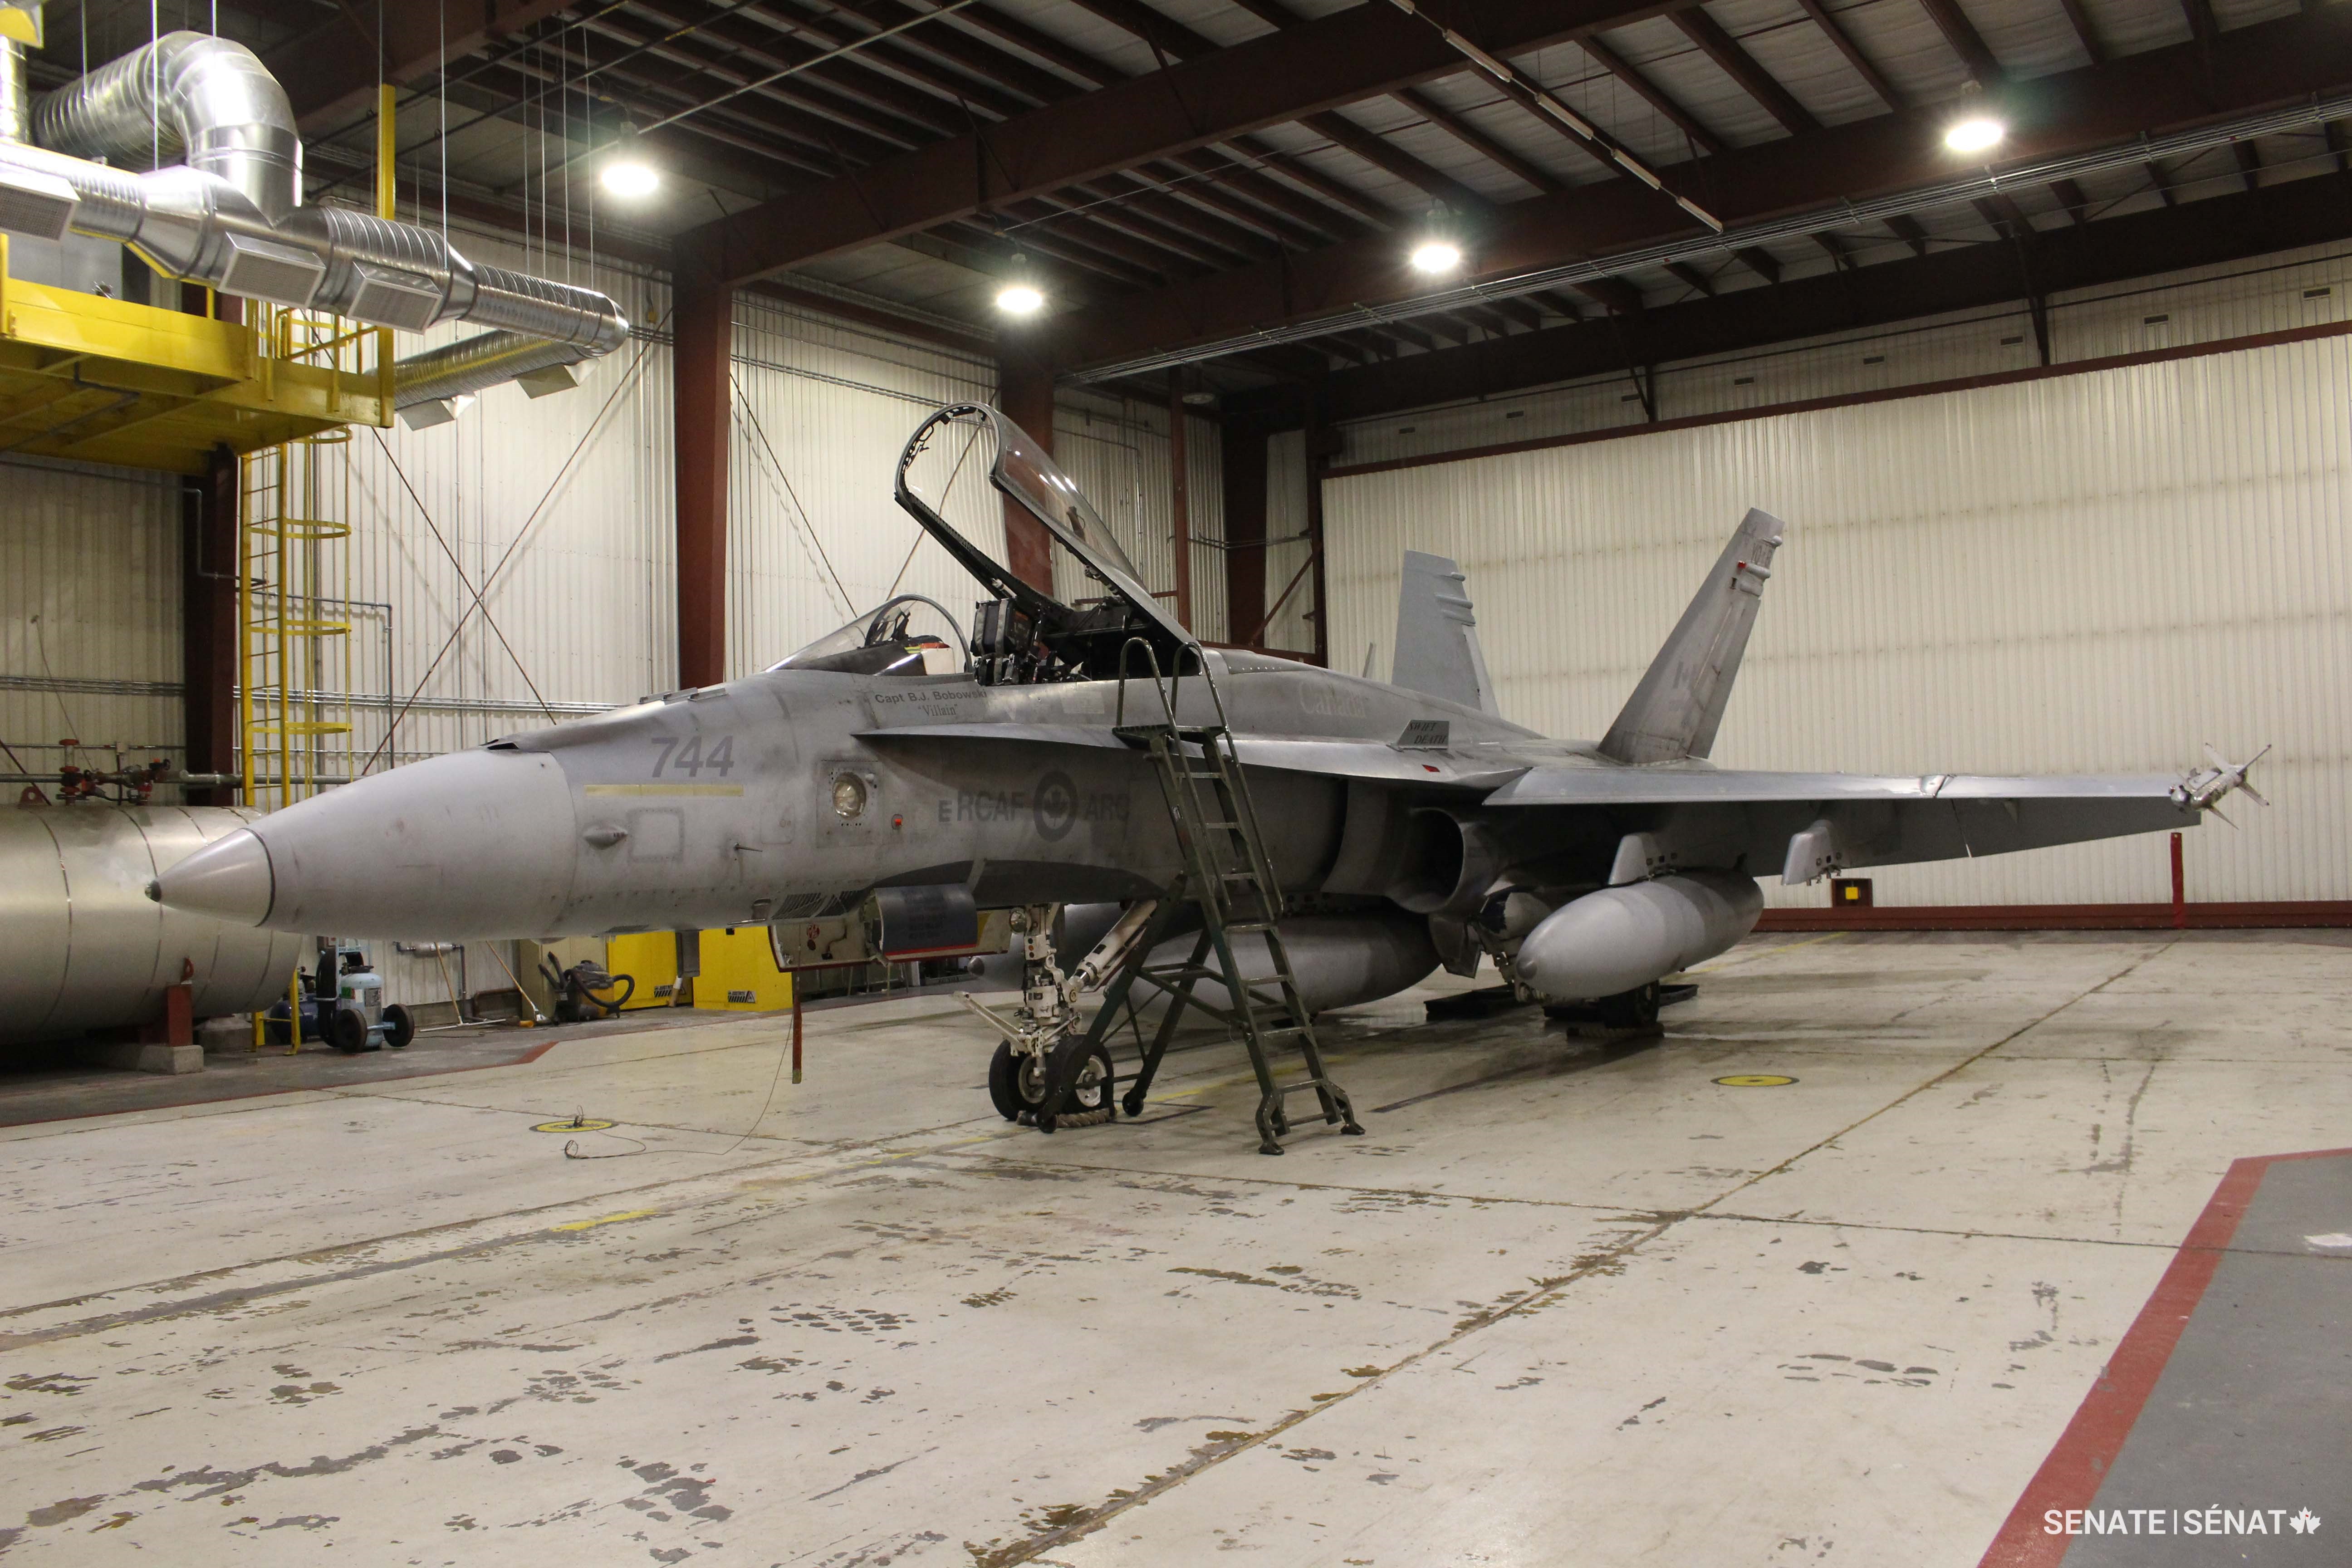 A CF-18 sits in a hangar at the Inuvik airport, which doubles as a NORAD forward operating location. CF-18s must use specially installed aircraft-carrier arresting gear to land because the runway is too short.